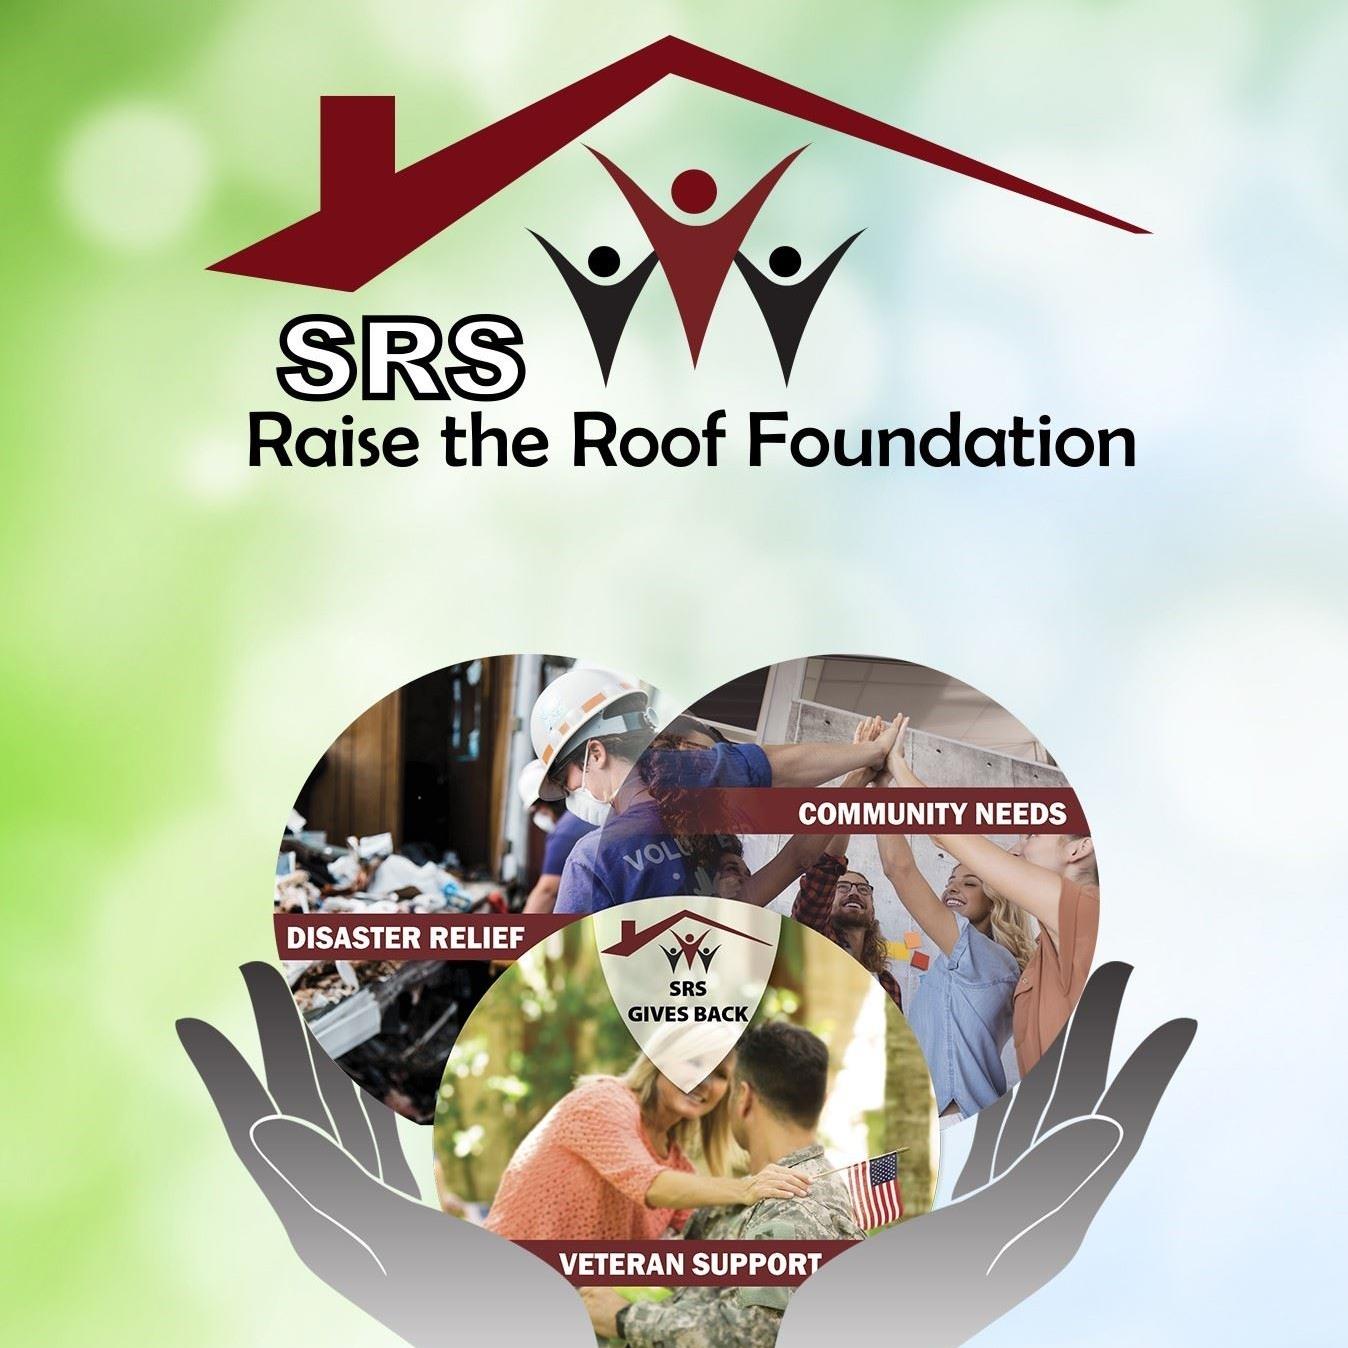 SRS Raise the Roof Foundation photo gallery 1